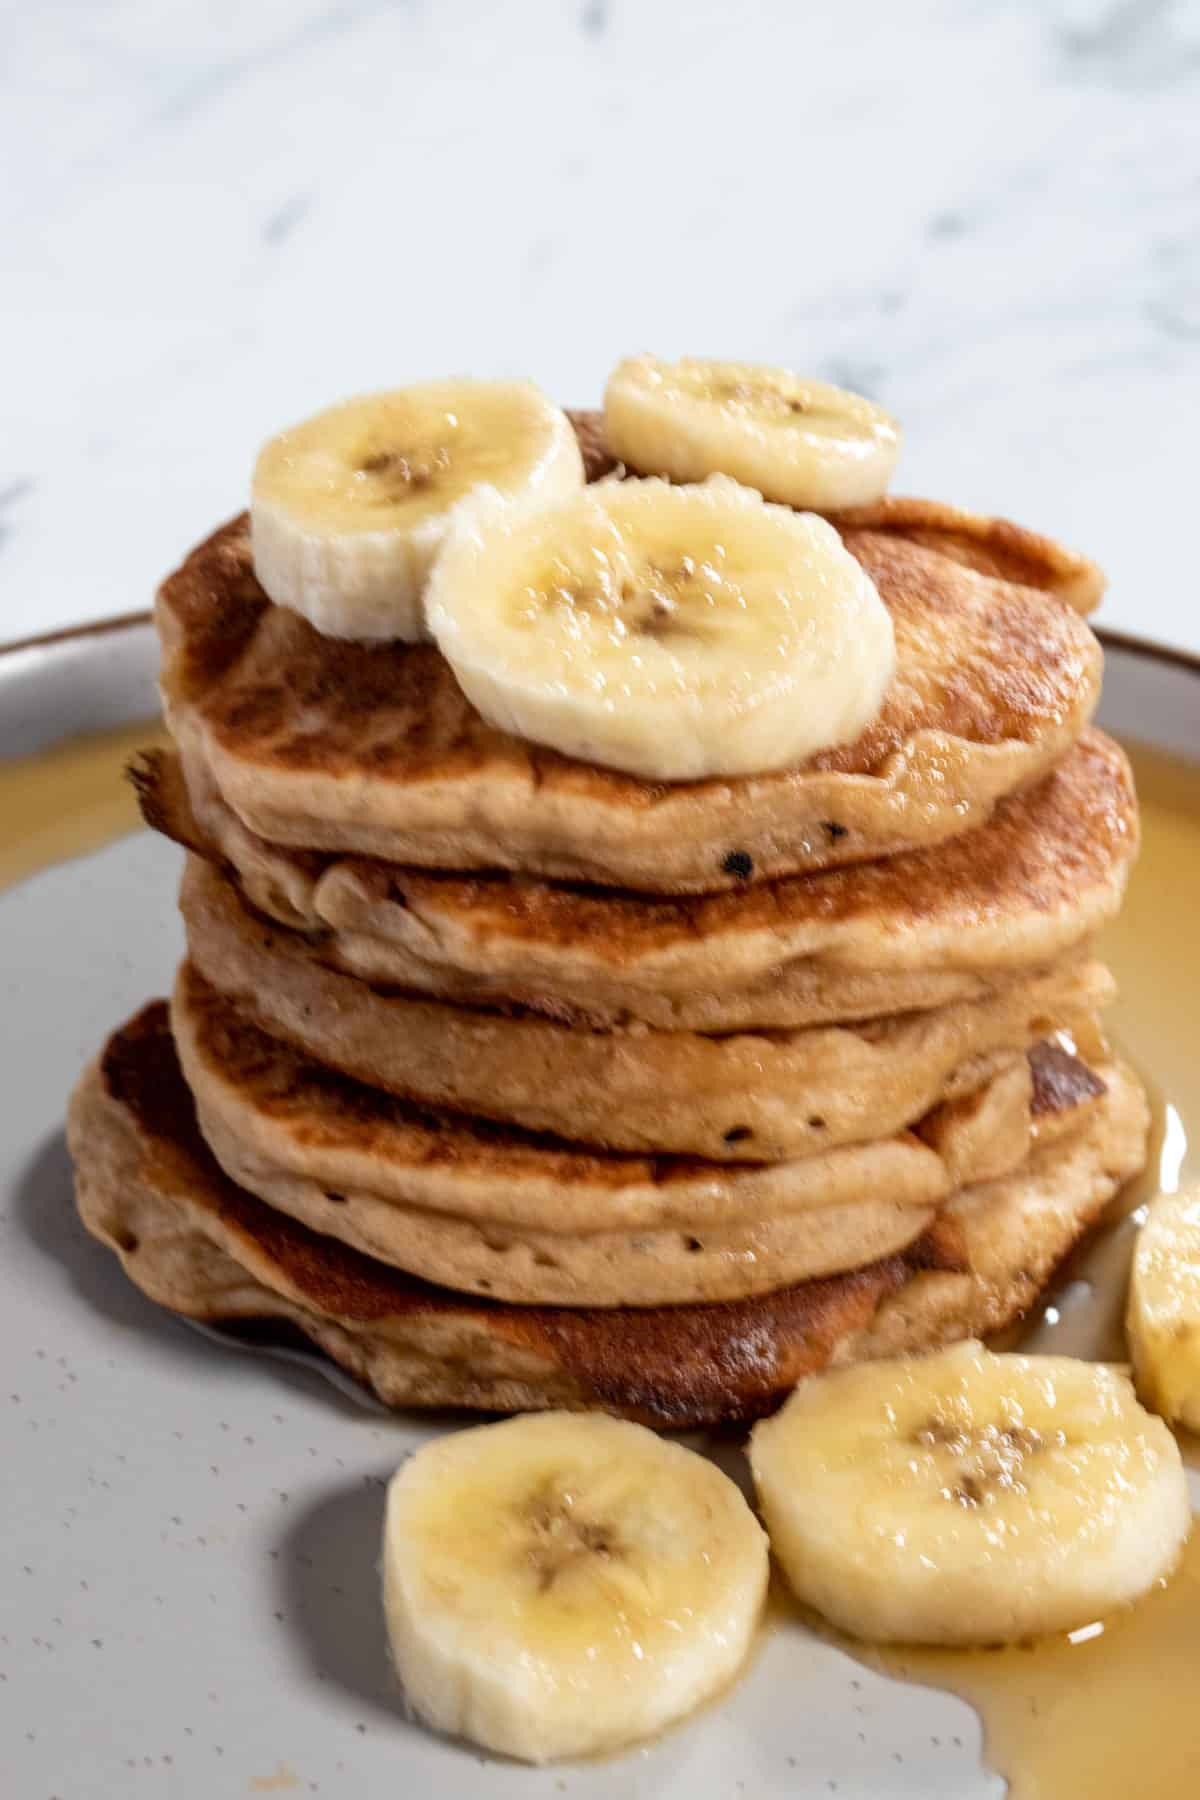 A shot of my vegan protein pancakes. Garnished with bananas and maple syrup.